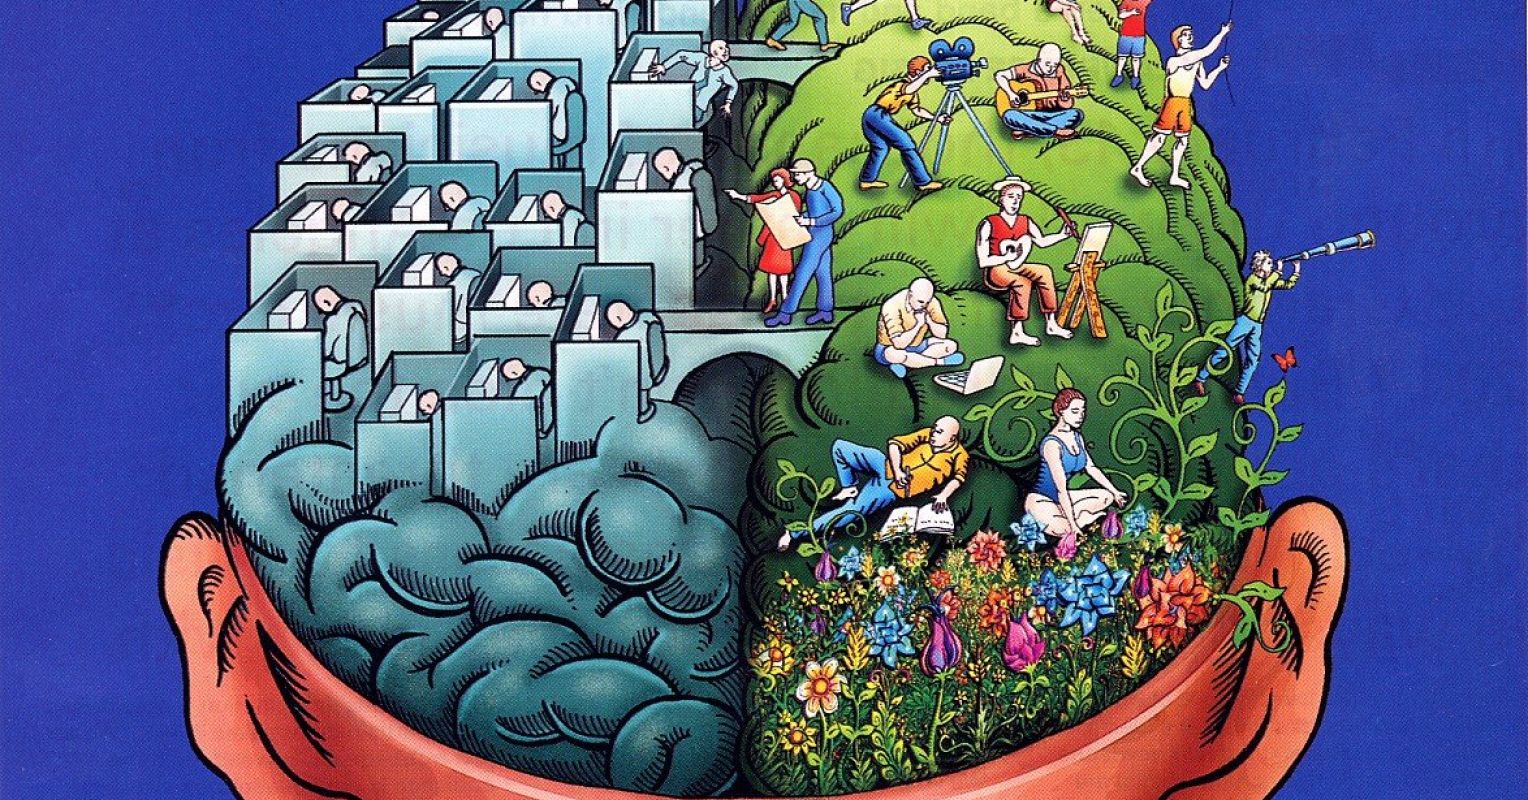 Are You a Left-Brained or Right-Brained Thinker?